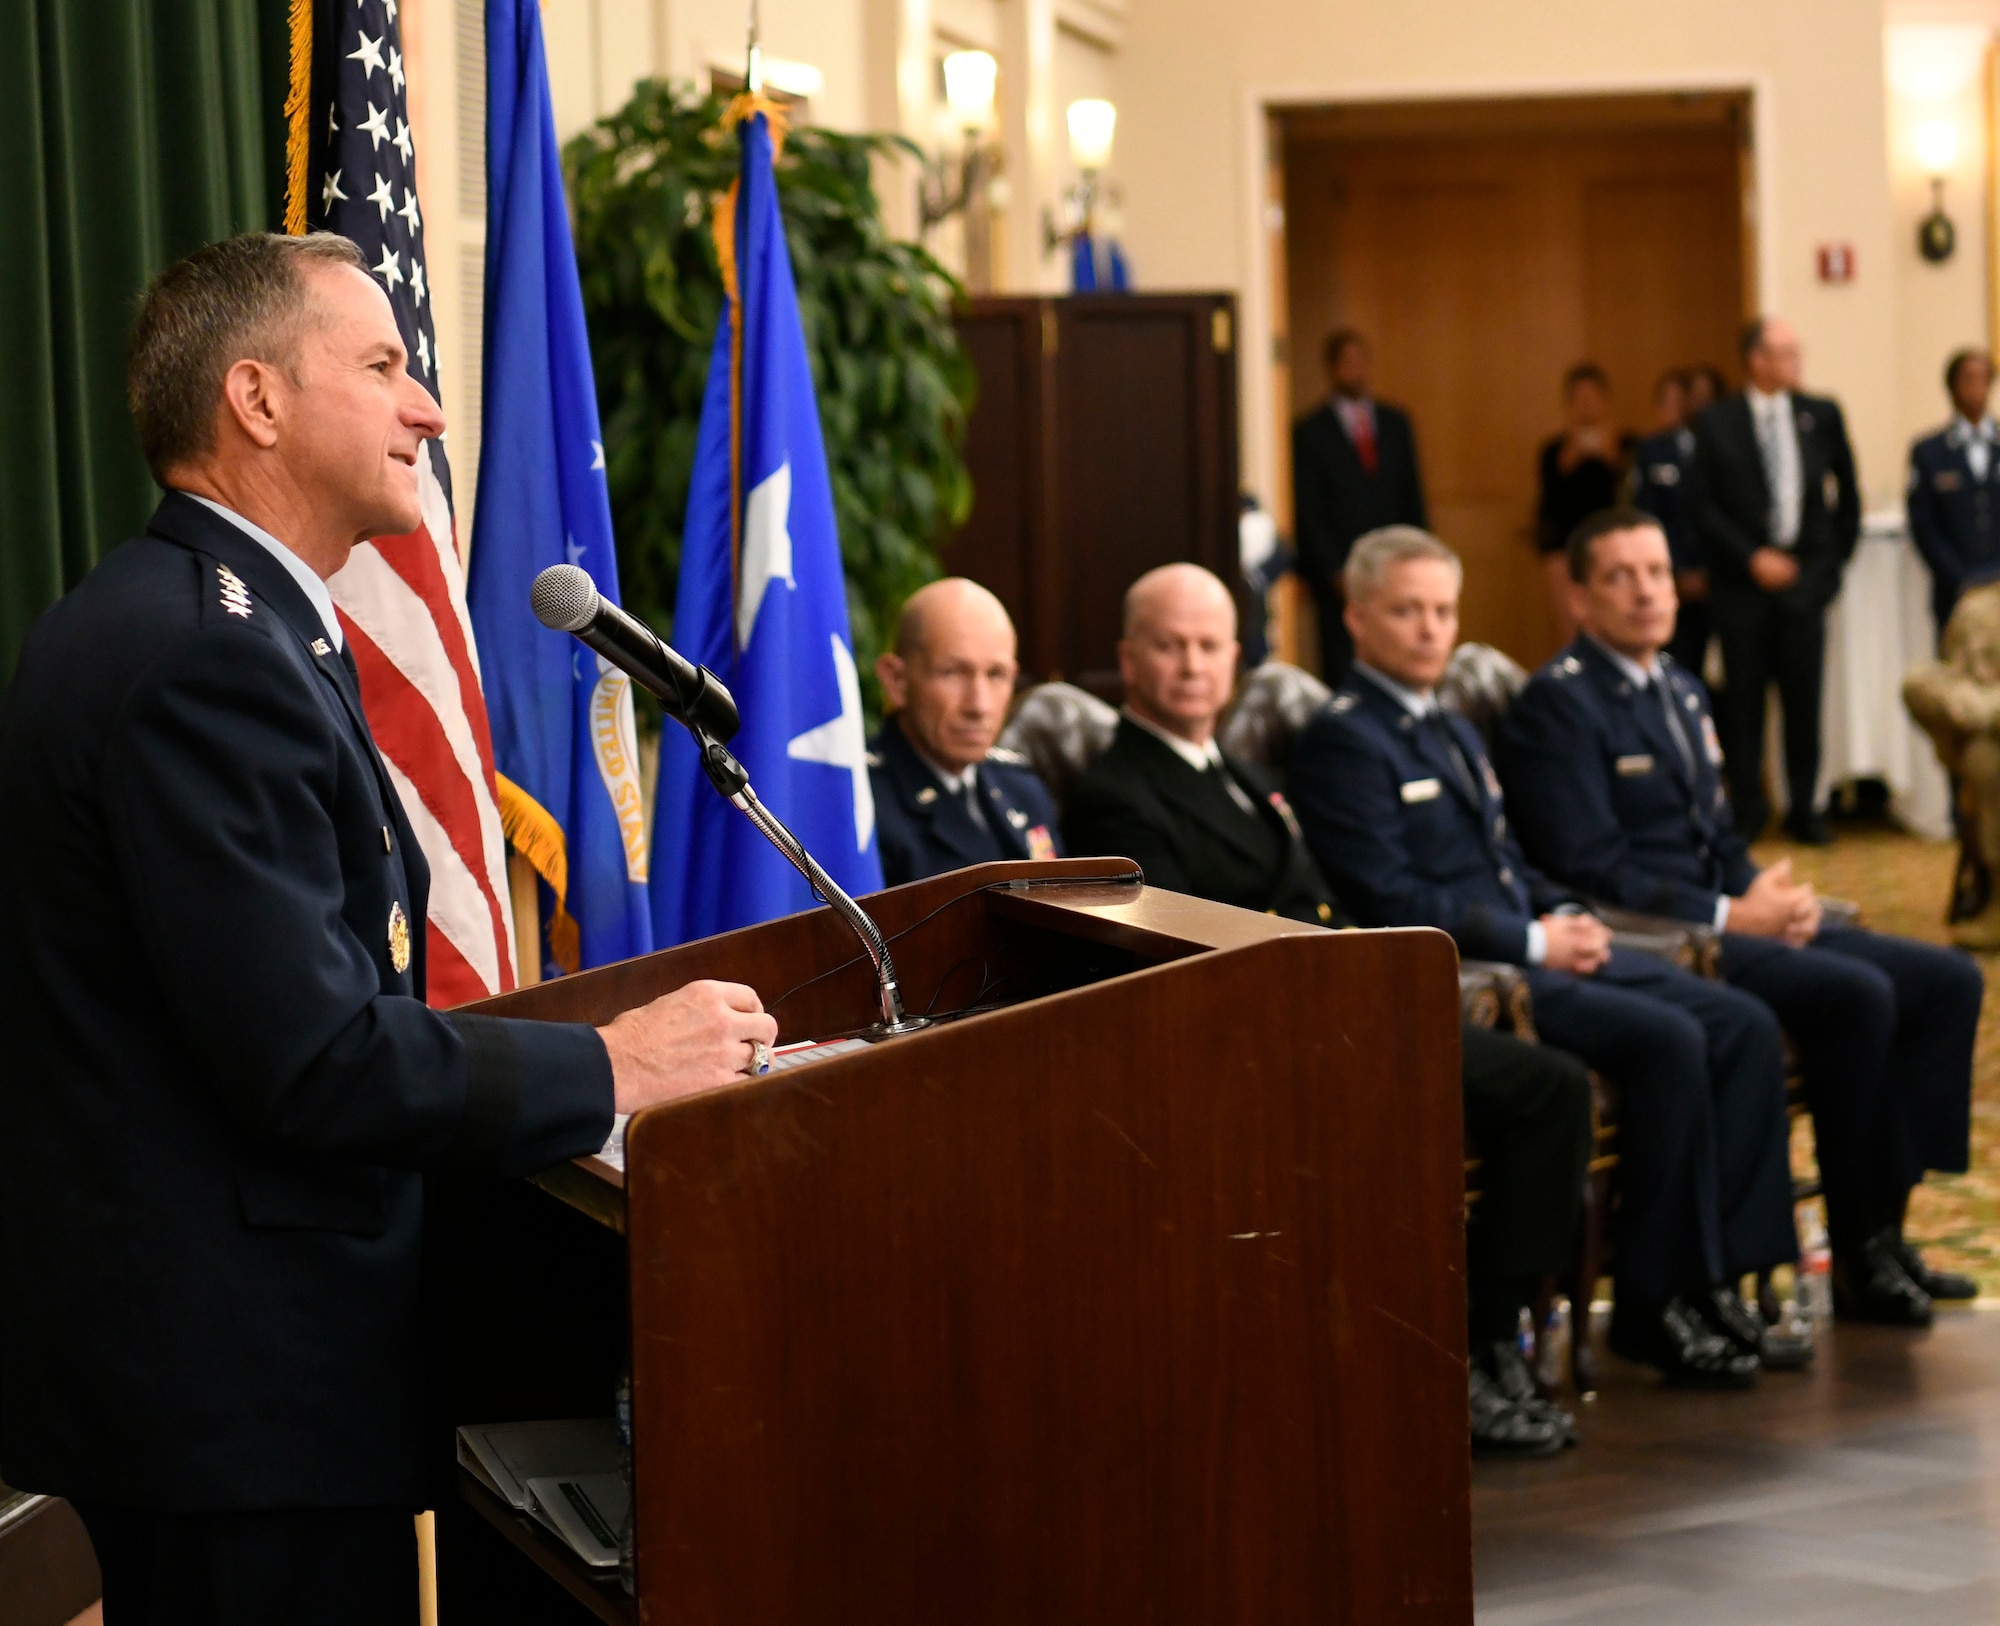 Air Force Chief of Staff Gen. David L. Goldfein provides opening remarks for the Sixteenth Air Force Assumption of Command at Joint Base San Antonio-Lackland, Texas, Oct. 11, 2019. Twenty-Fourth and Twenty-Fifth Air Forces were inactivated during the ceremony to integrate into the new information warfare Numbered Air Force. Sixteenth Air Force is responsible for providing IW capabilities to combatant commanders with the speed to match today’s technological environment. (U.S. Air Force photo by Tech. Sgt. R.J. Biermann)